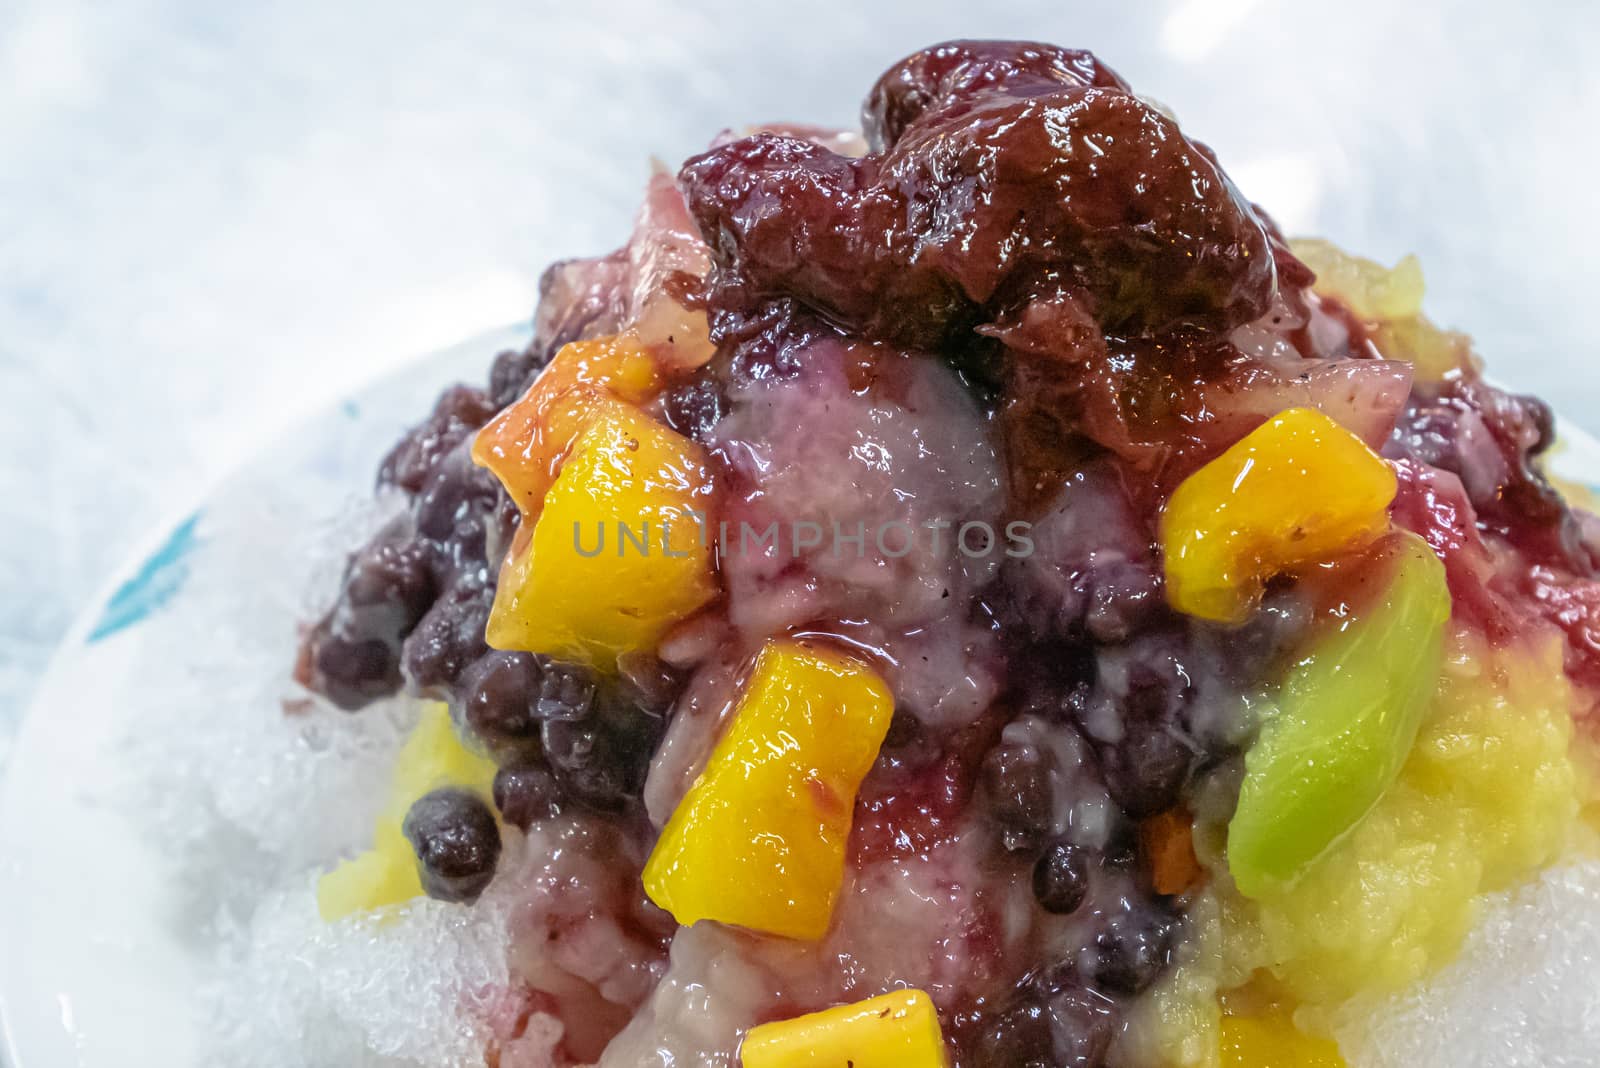 Taiwanese mixed fruit shaved Ice snowflake smoothie at night market in Kaohsiung, Taiwan. by phasuthorn